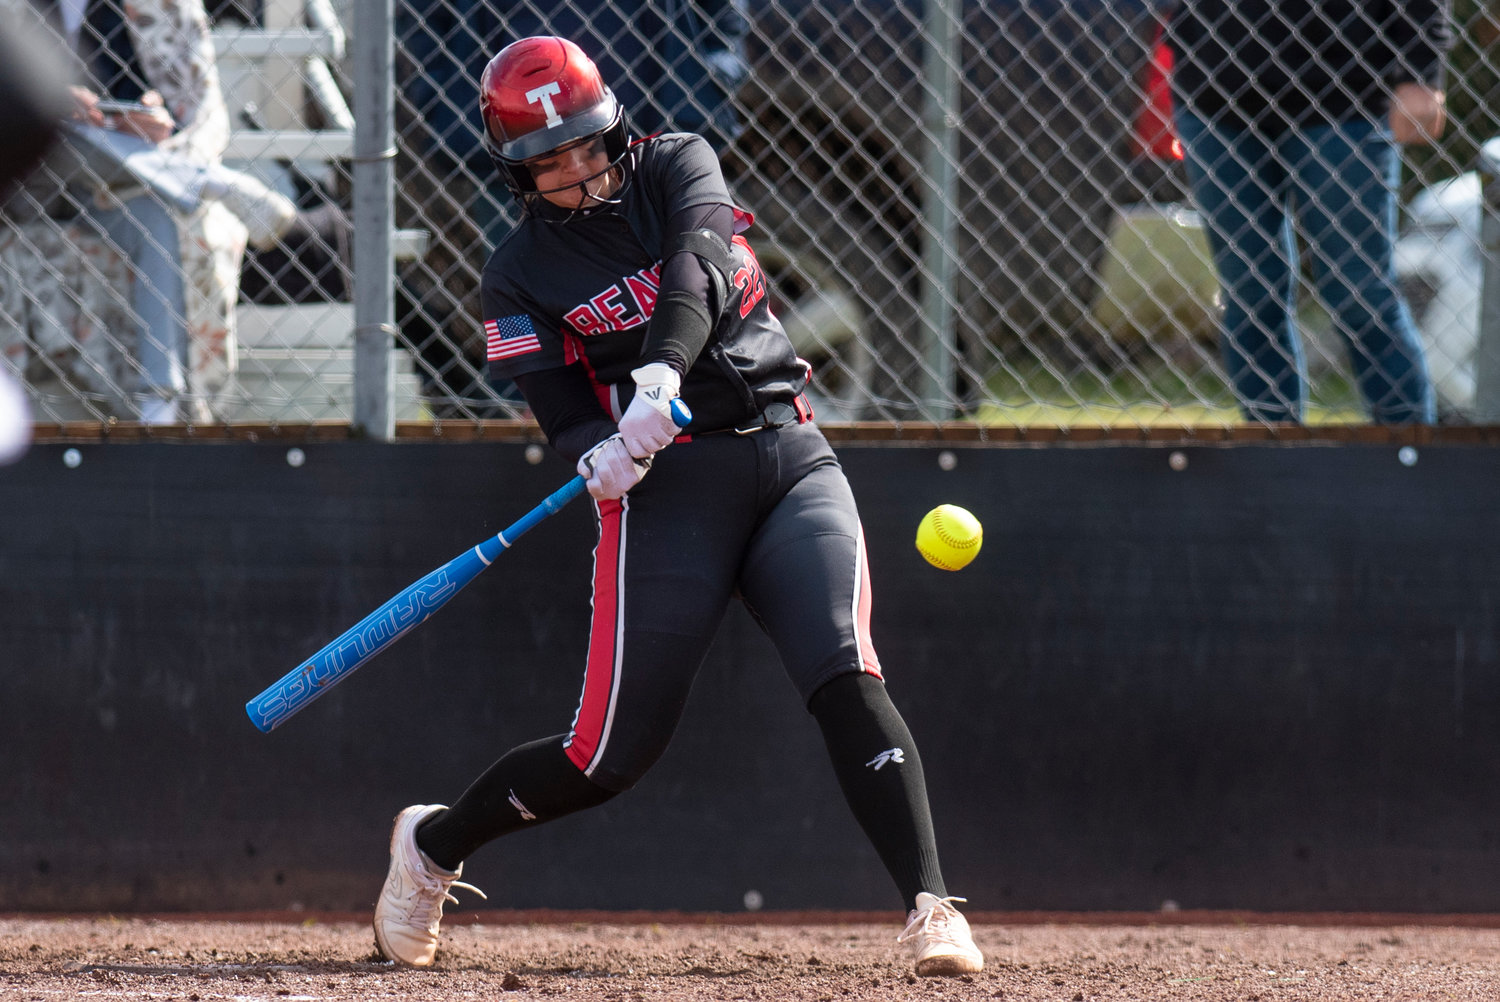 Tenino's Courtney Backman lines up an Elma pitch during a home game on April 26.